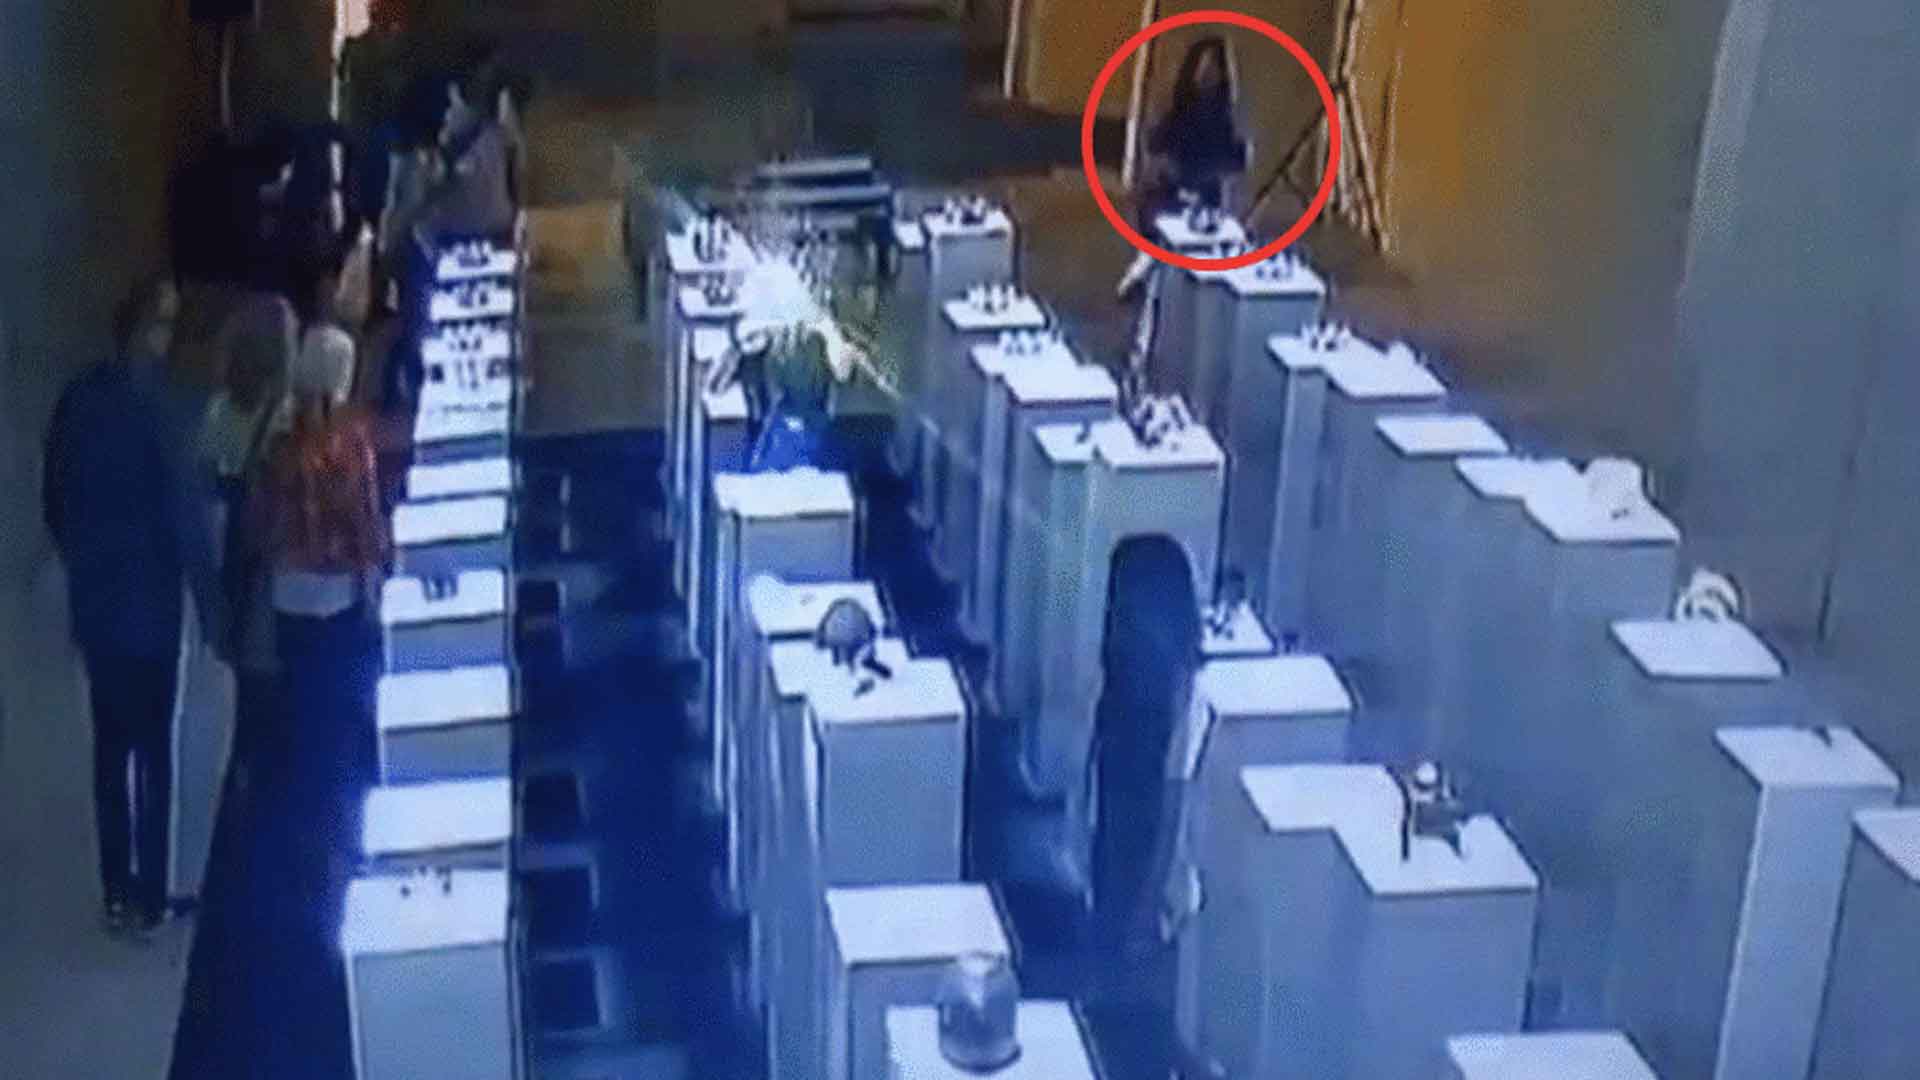 Woman Tries To Take Selfie At Gallery, Destroys $200,000 Worth Of Art